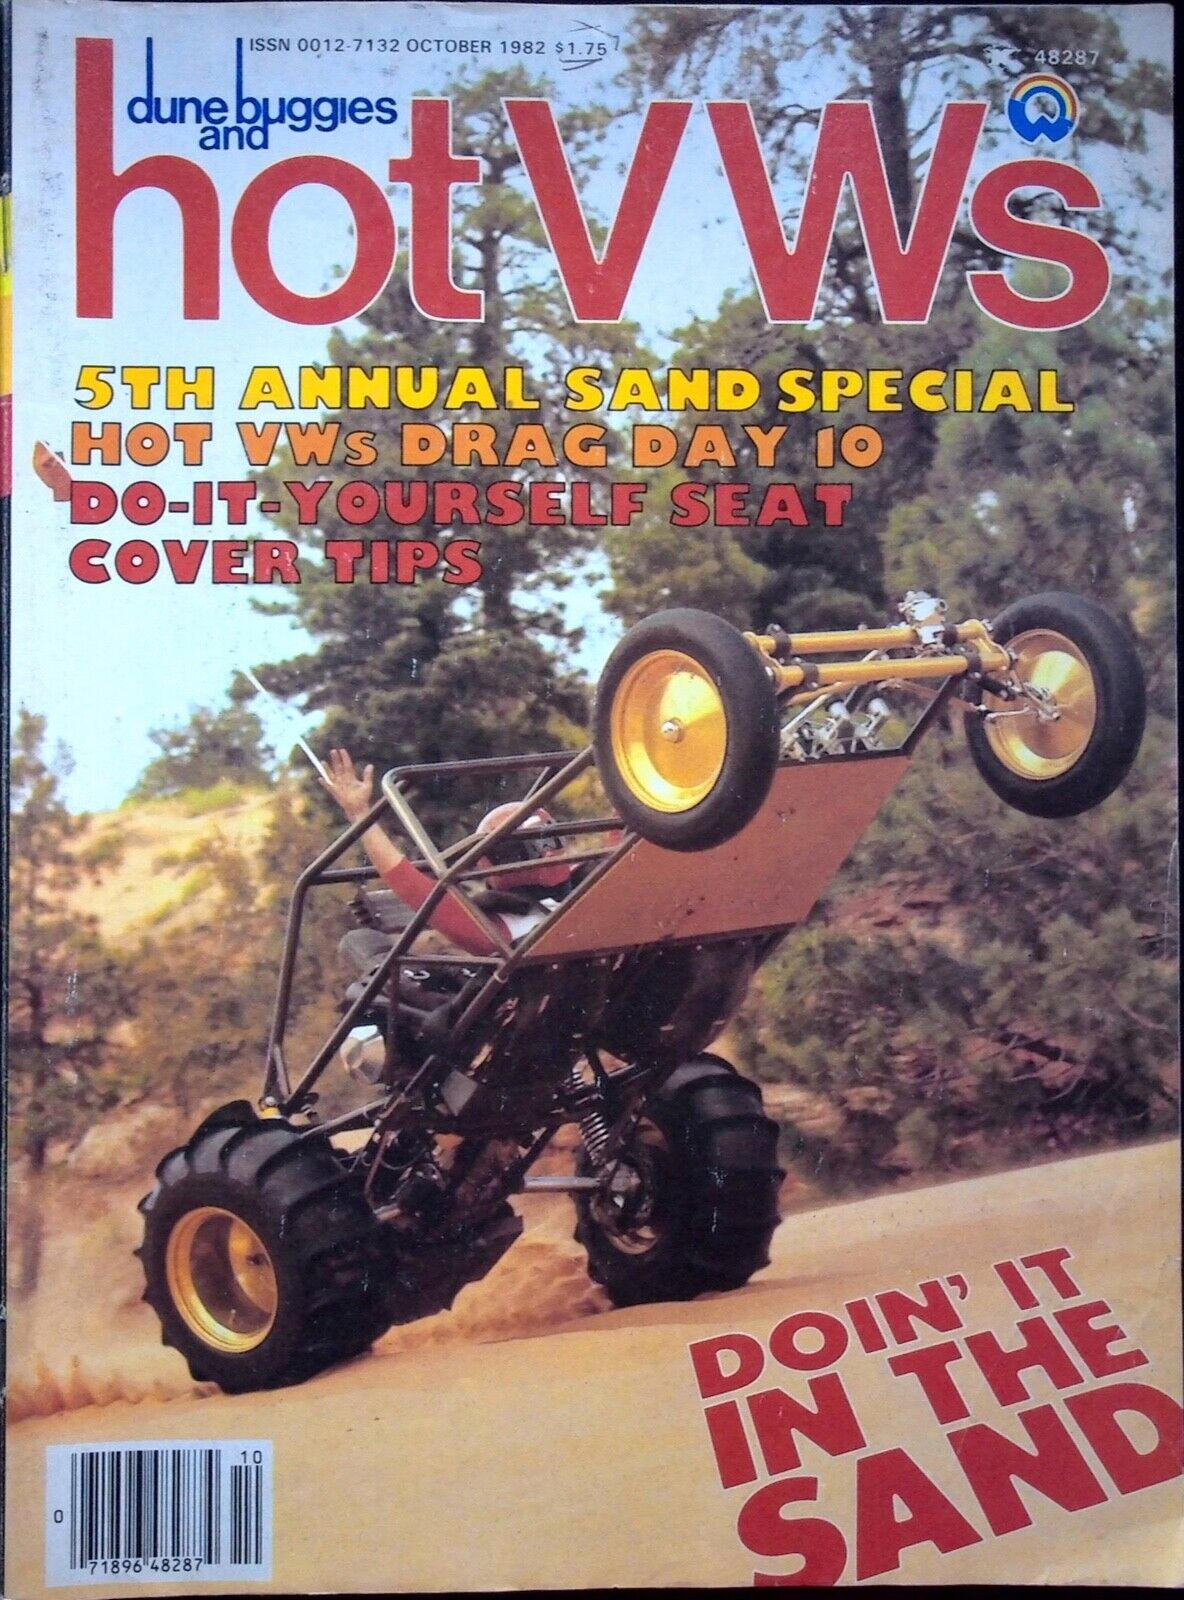 5TH ANNUAL SAND SPECIAL - HOT VW\'S MAGAZINE, VOLUME 15, NUMBER 10, OCTOBER 1982